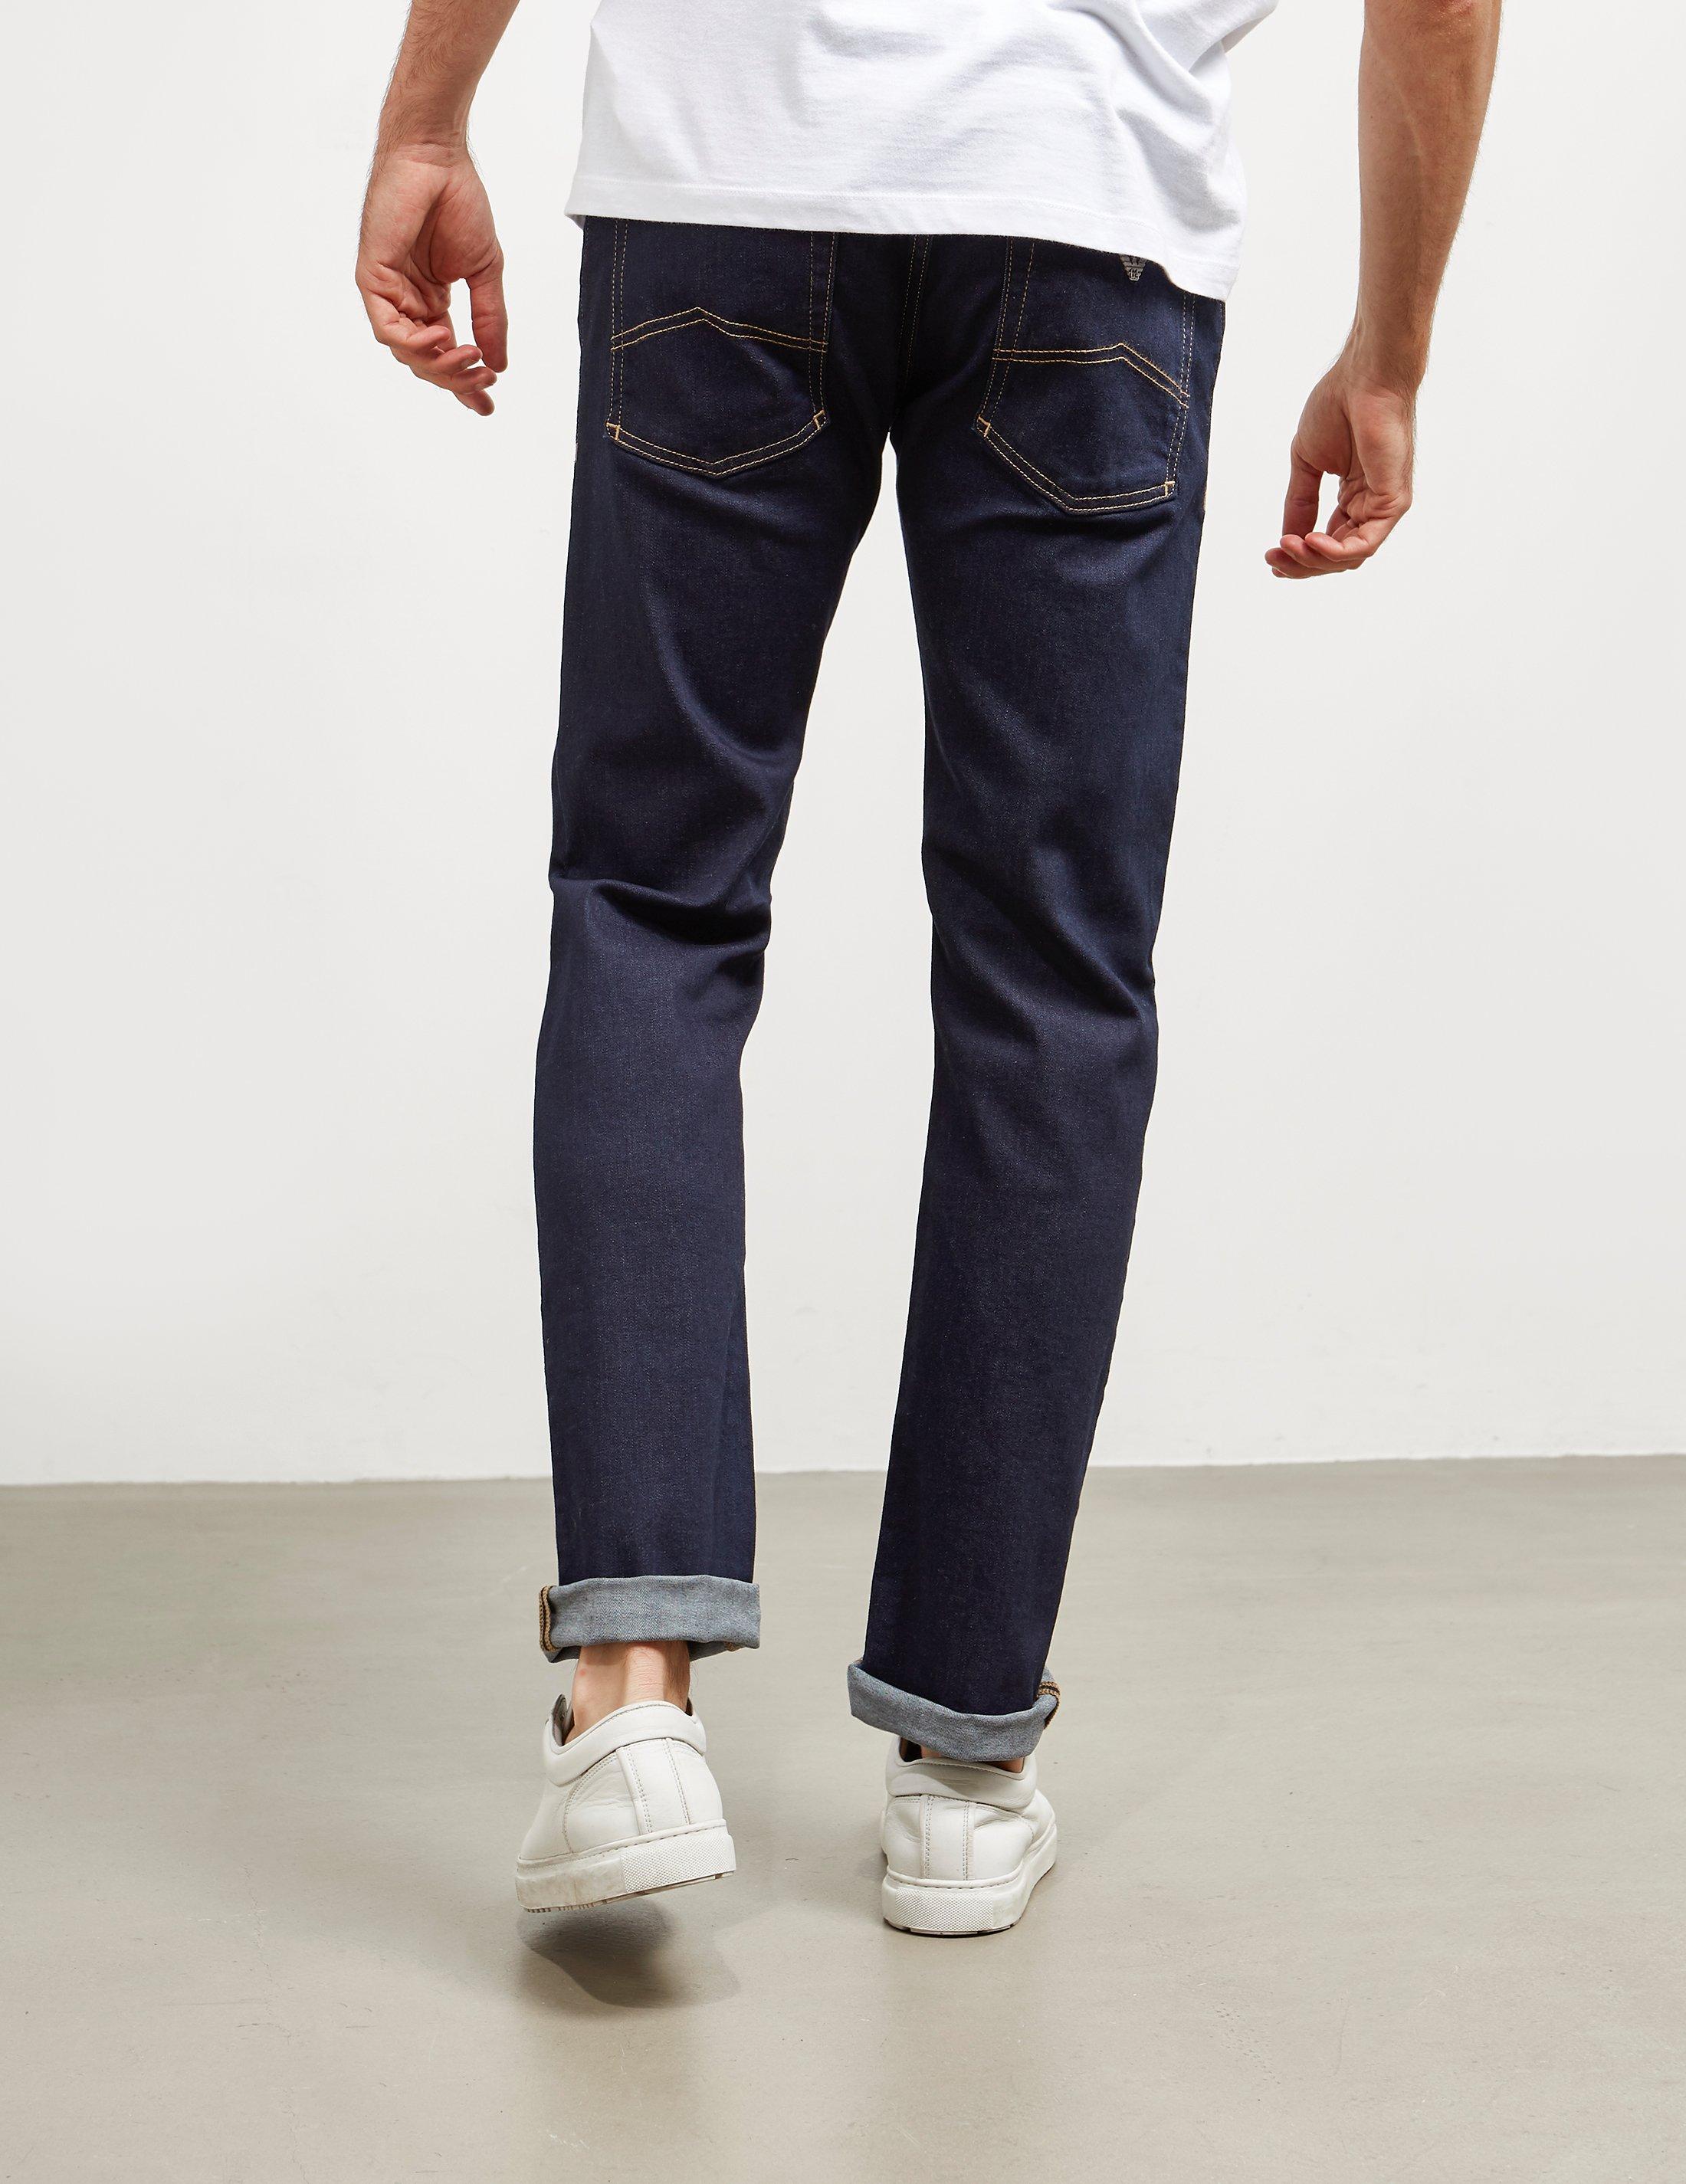 armani j45 tapered jeans, OFF 75%,Buy!